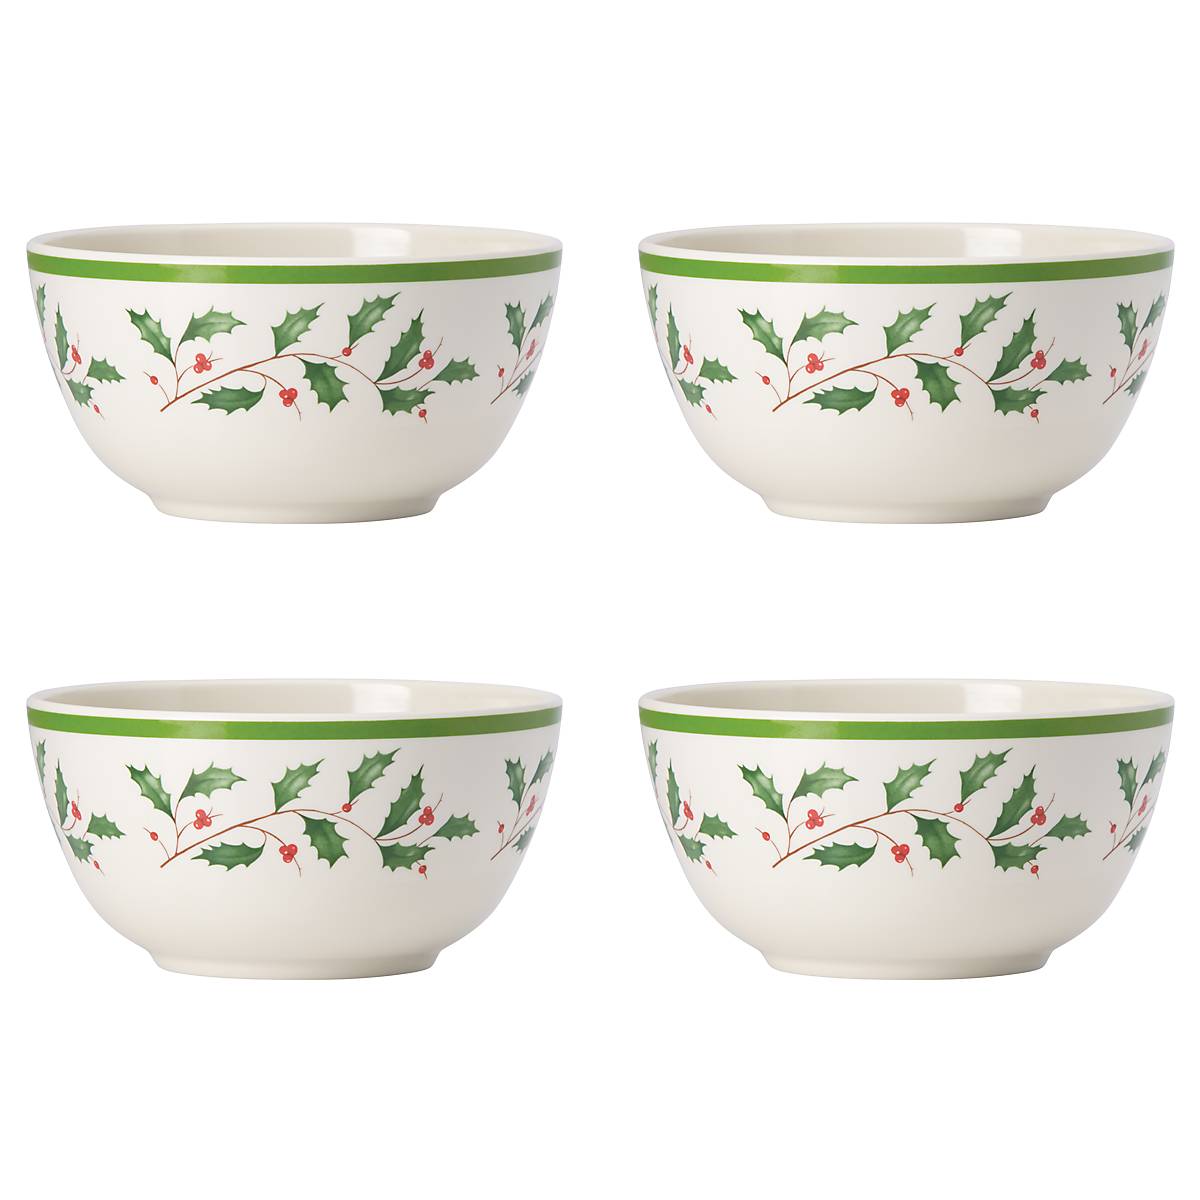 Shop Holiday Deals on Mixing Bowls 